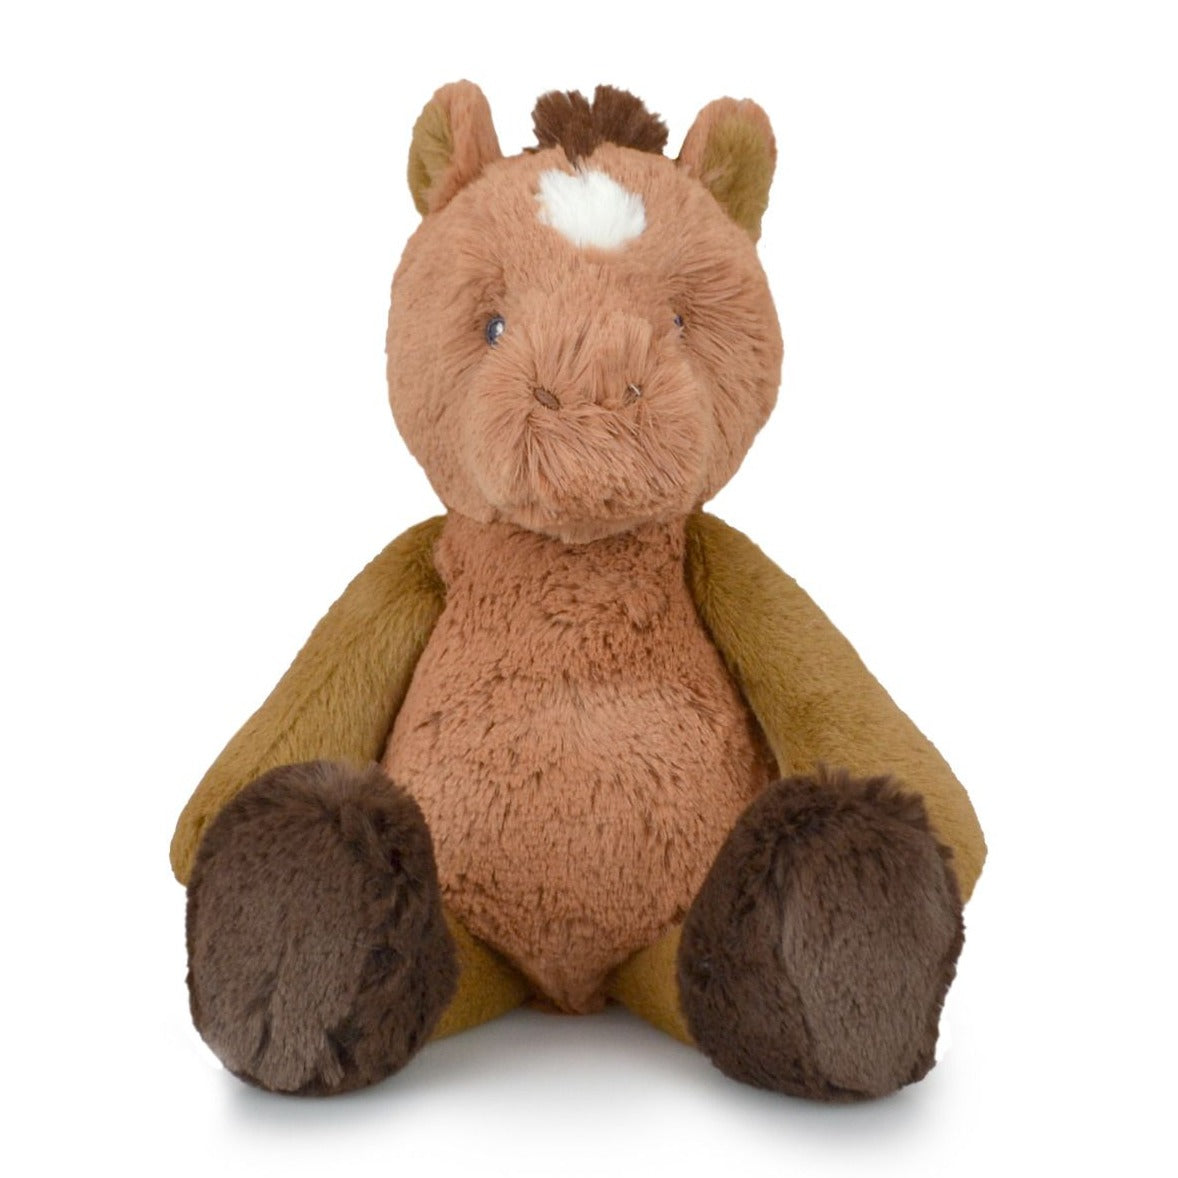 Korimco plush soft toy horse - angus and dudley